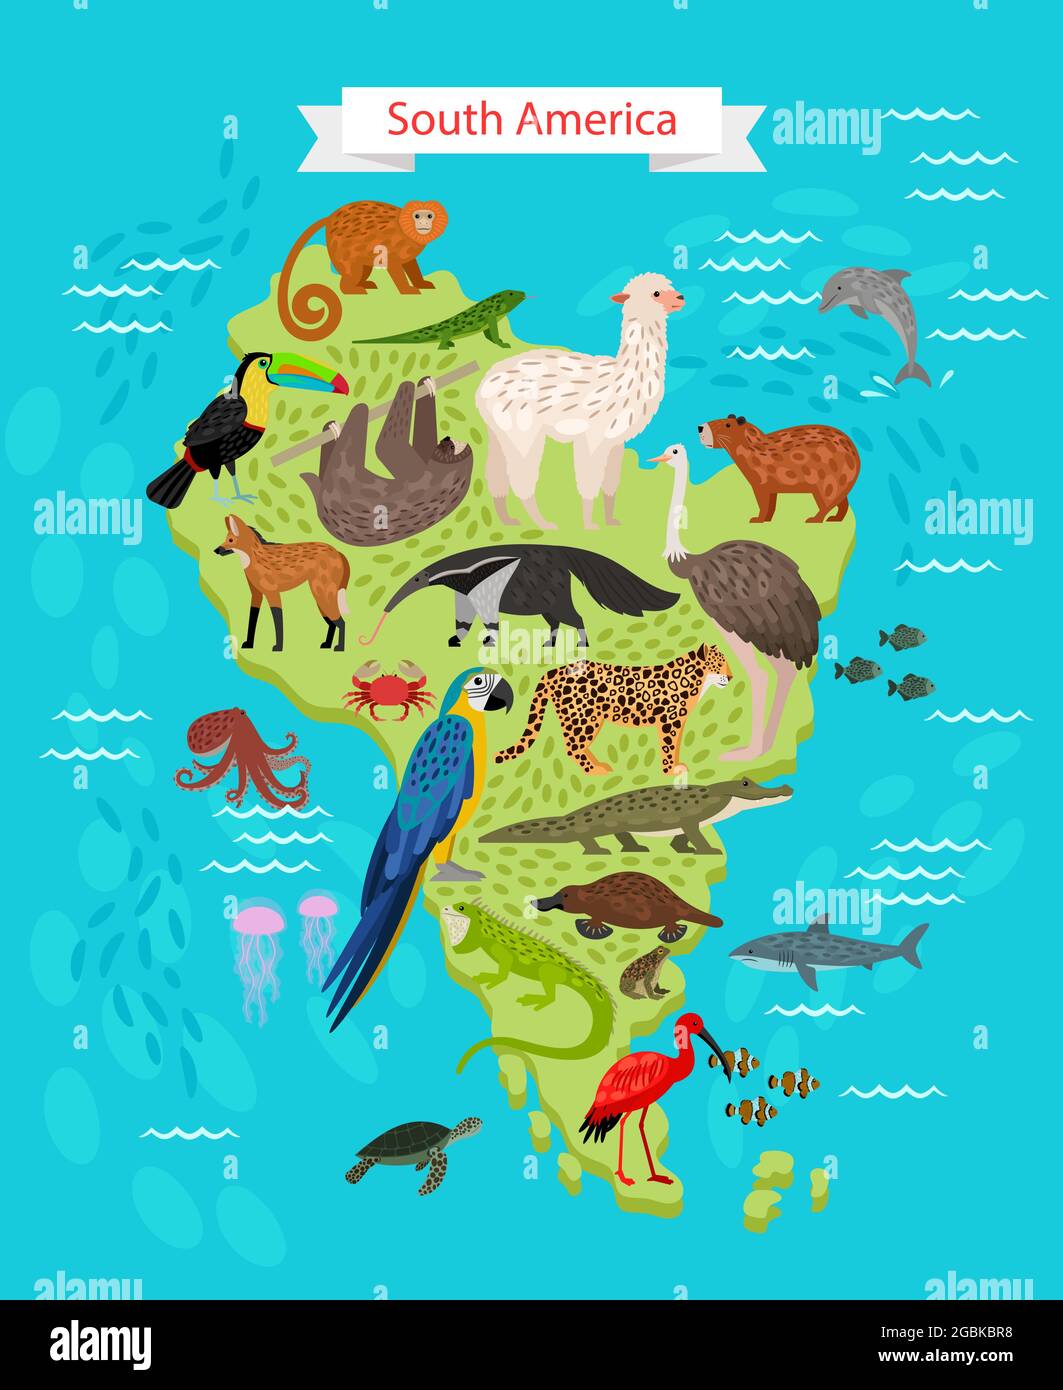 Different animals and Birds on South America Map Stock Vector